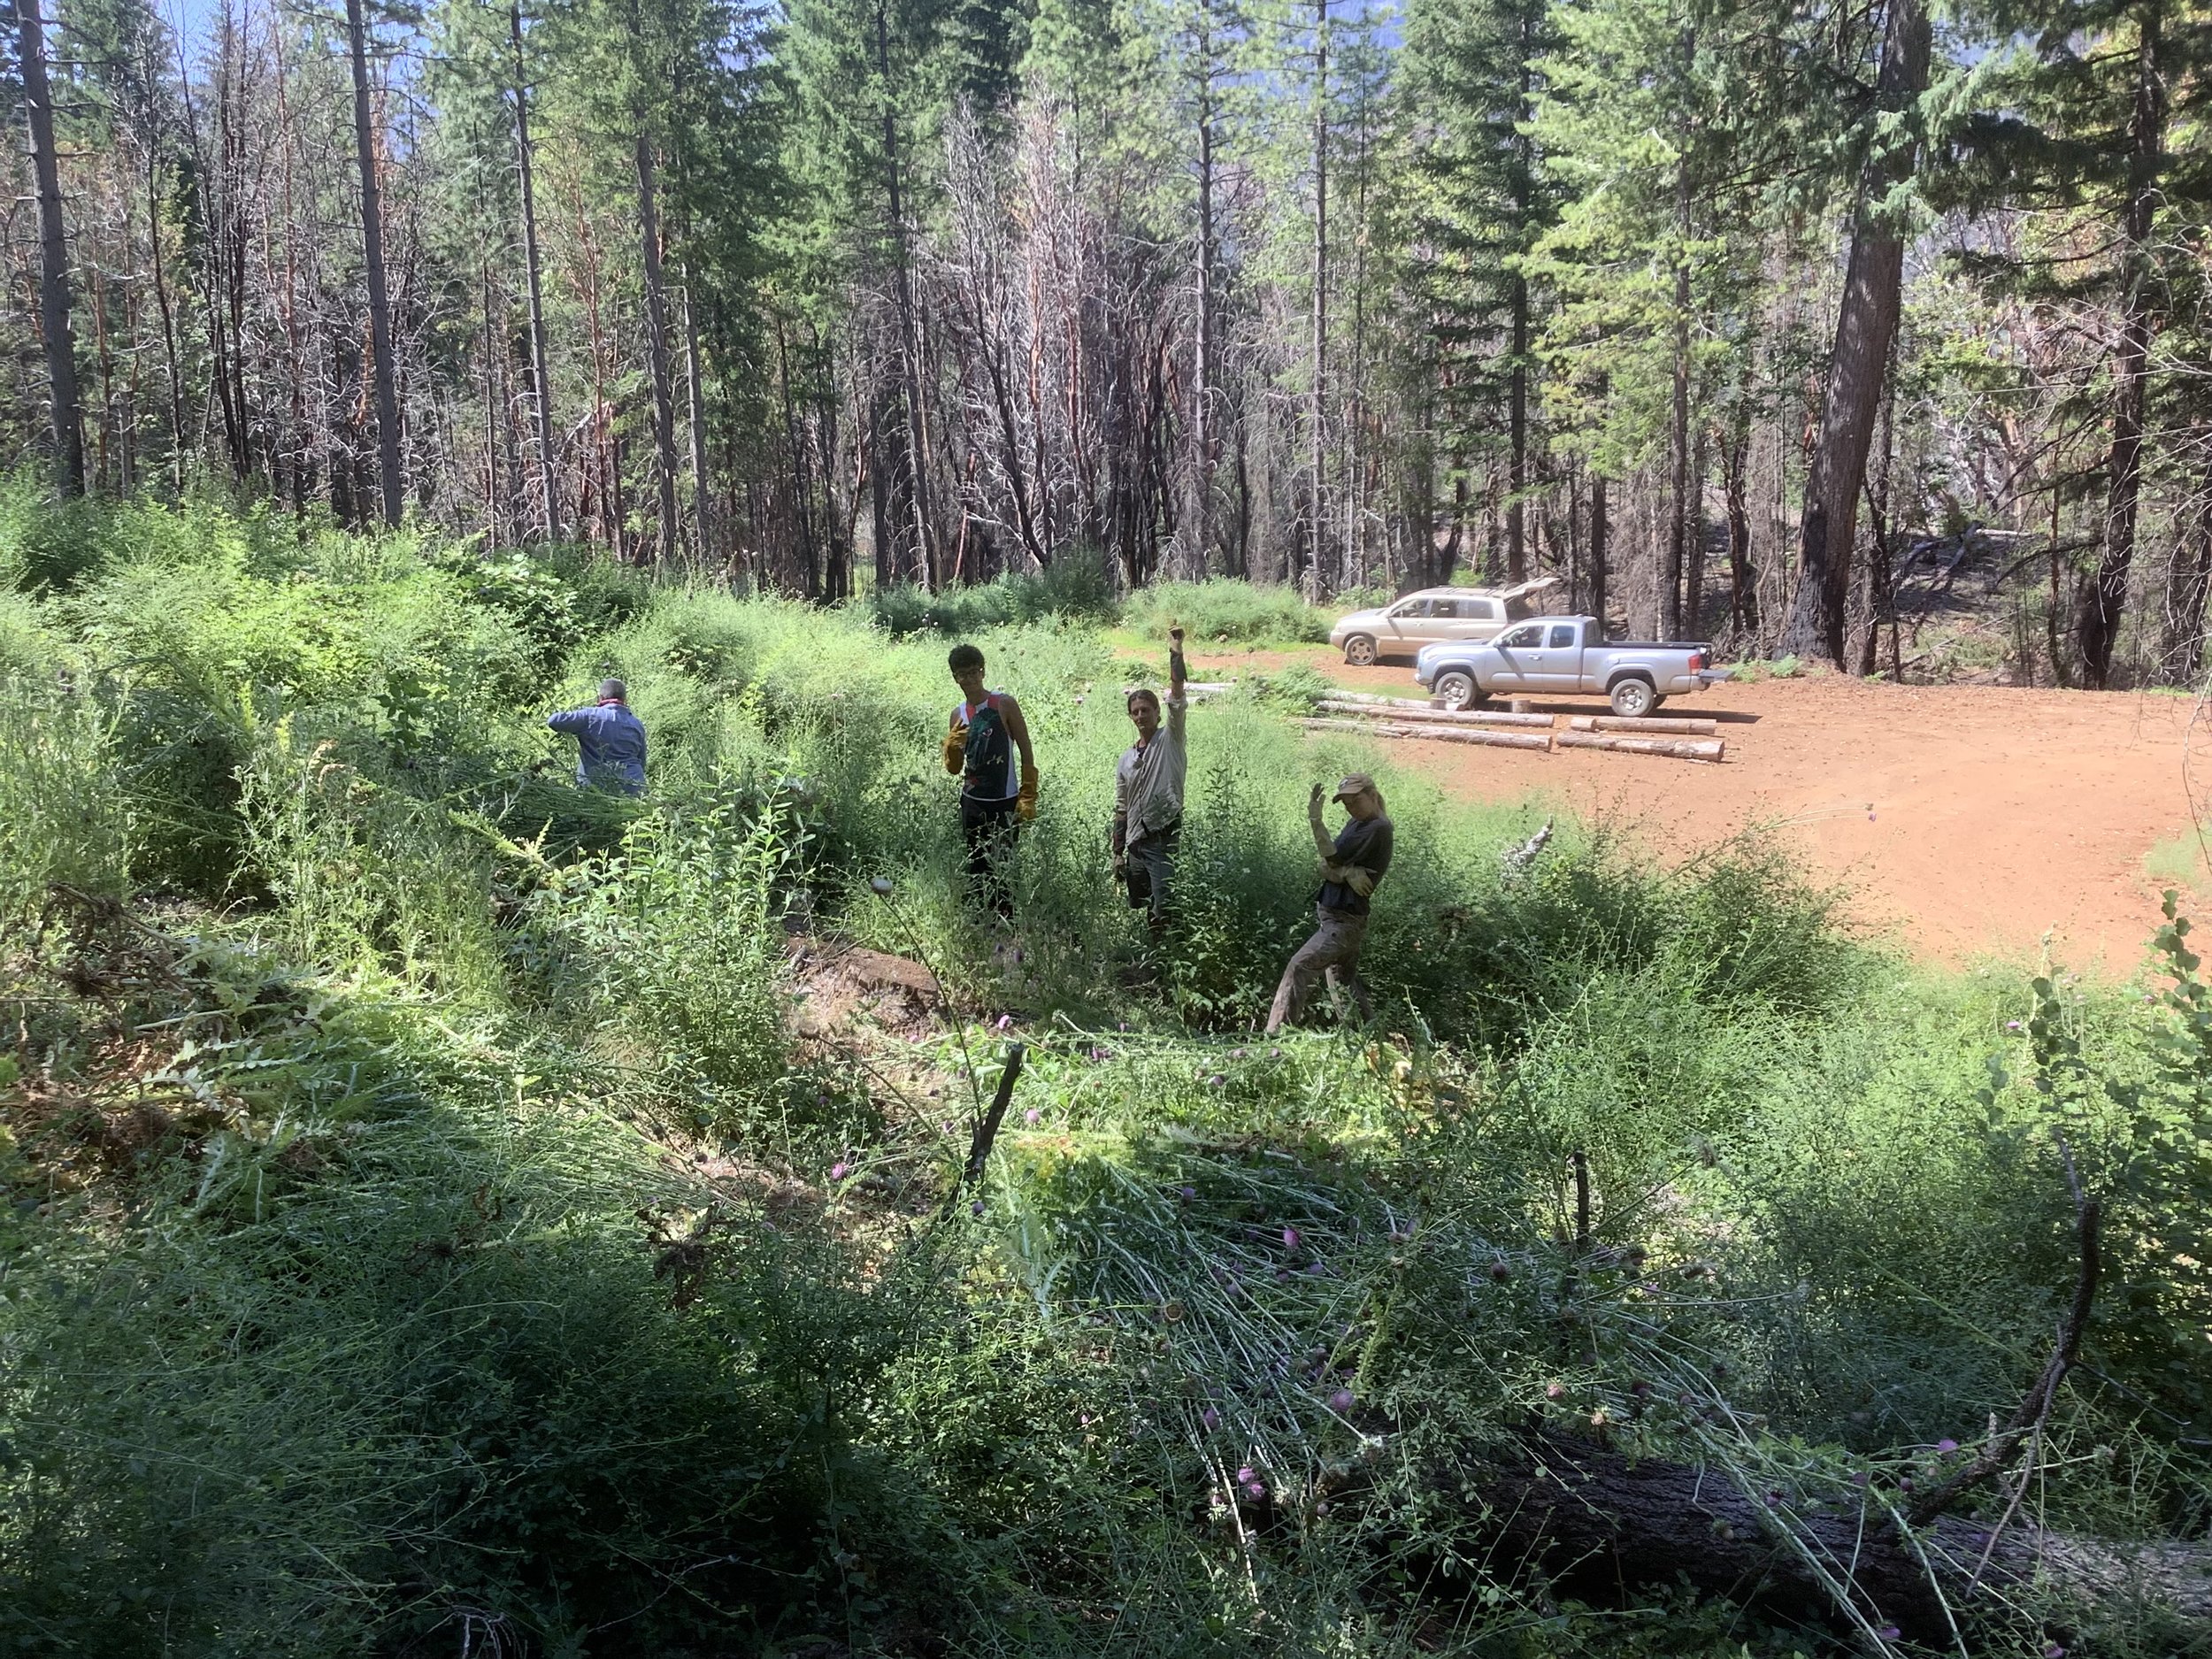  The team tackling a forest of invasive Plumeless Thistle up the South Fork of Indian Creek.  